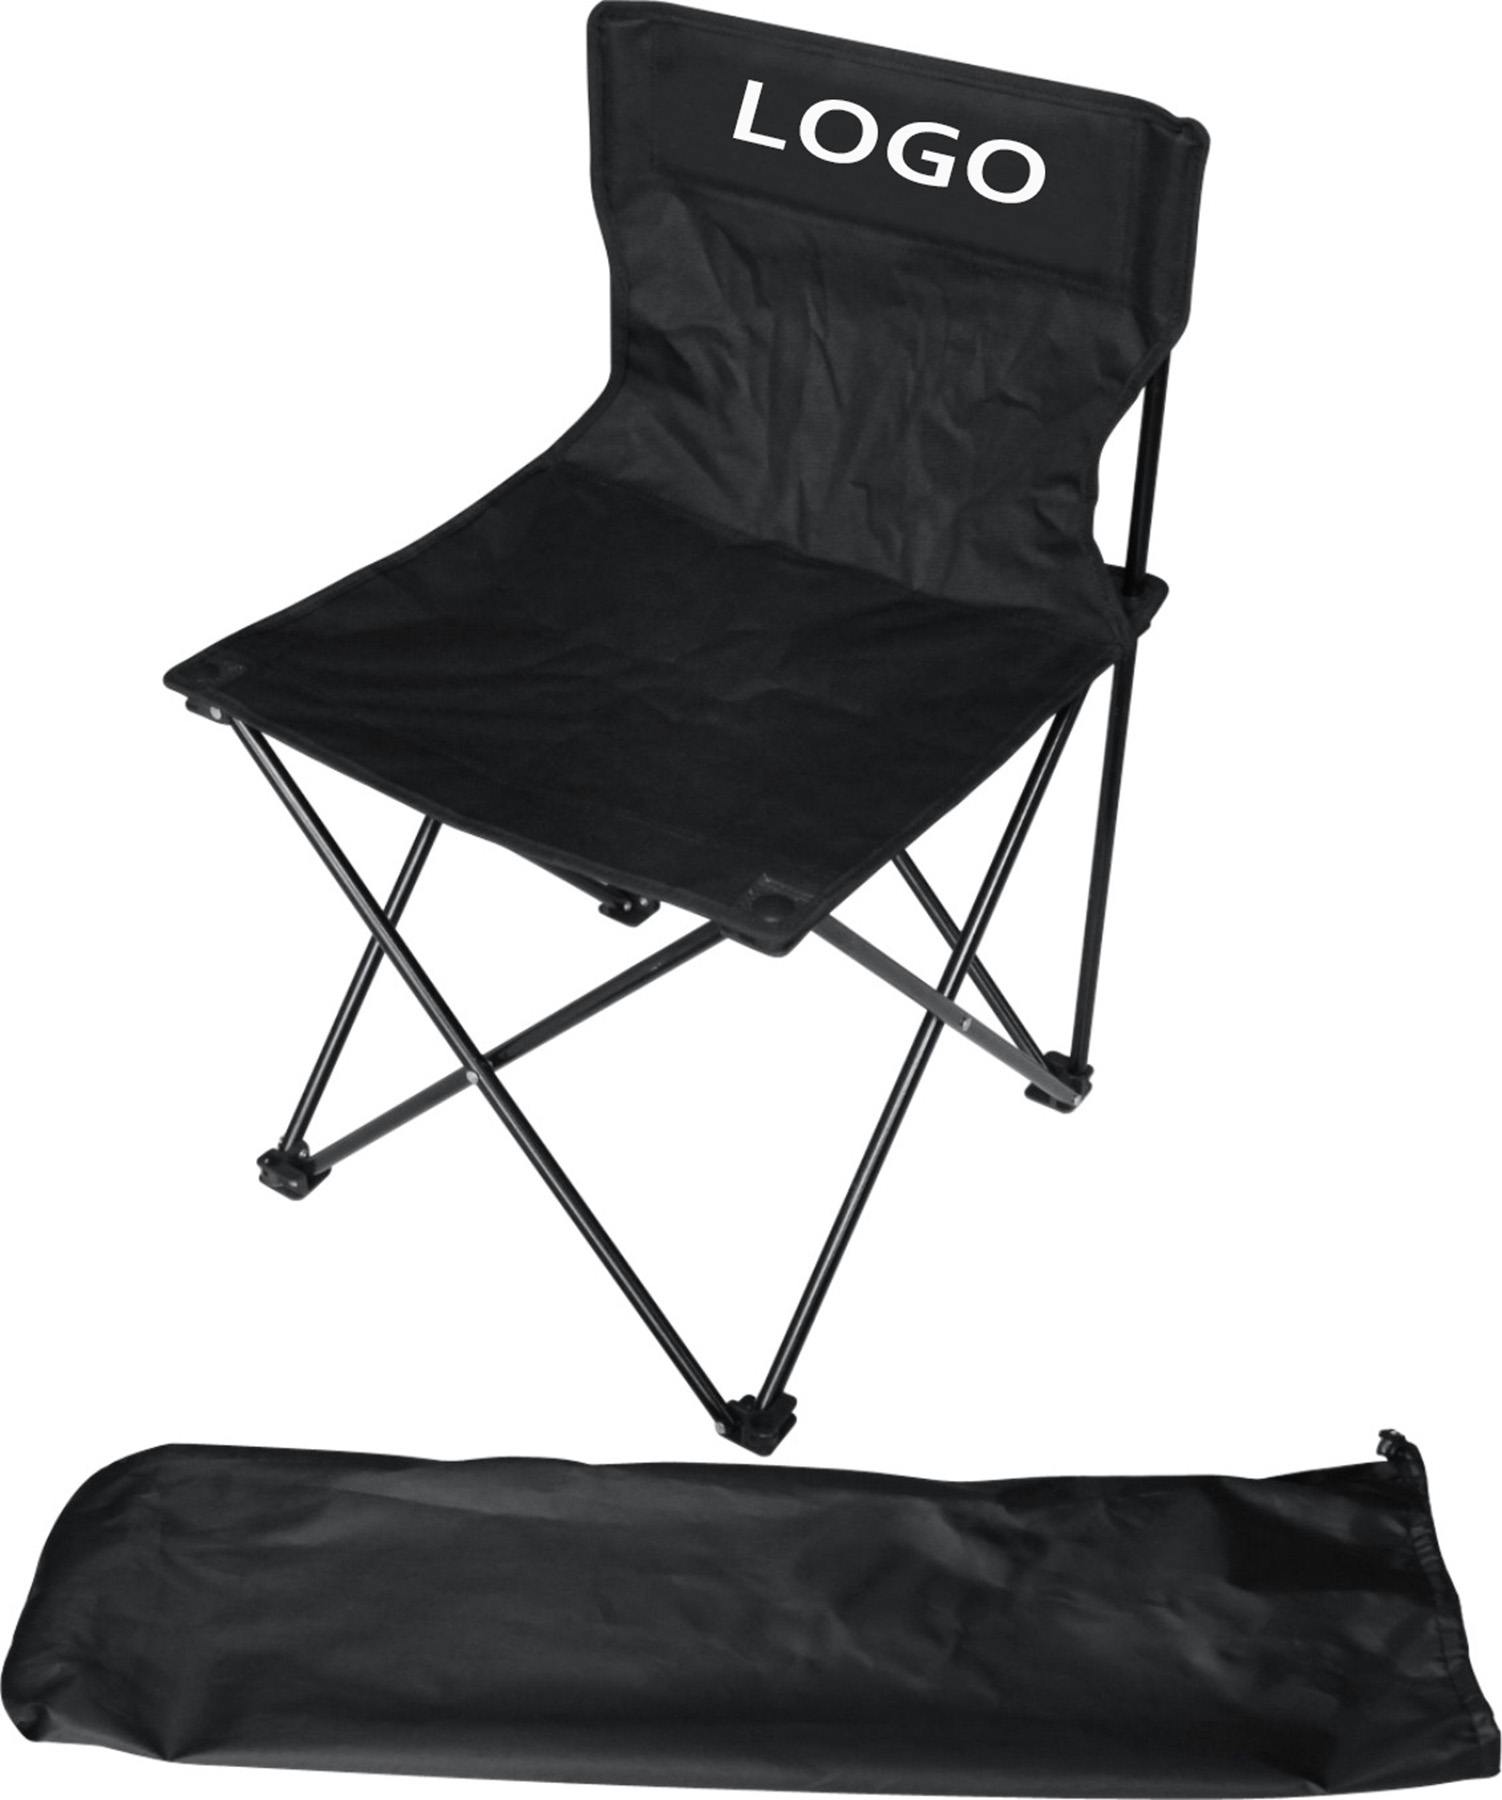 Small Folding Beach Chair With Carrying Bag  WPLC20010